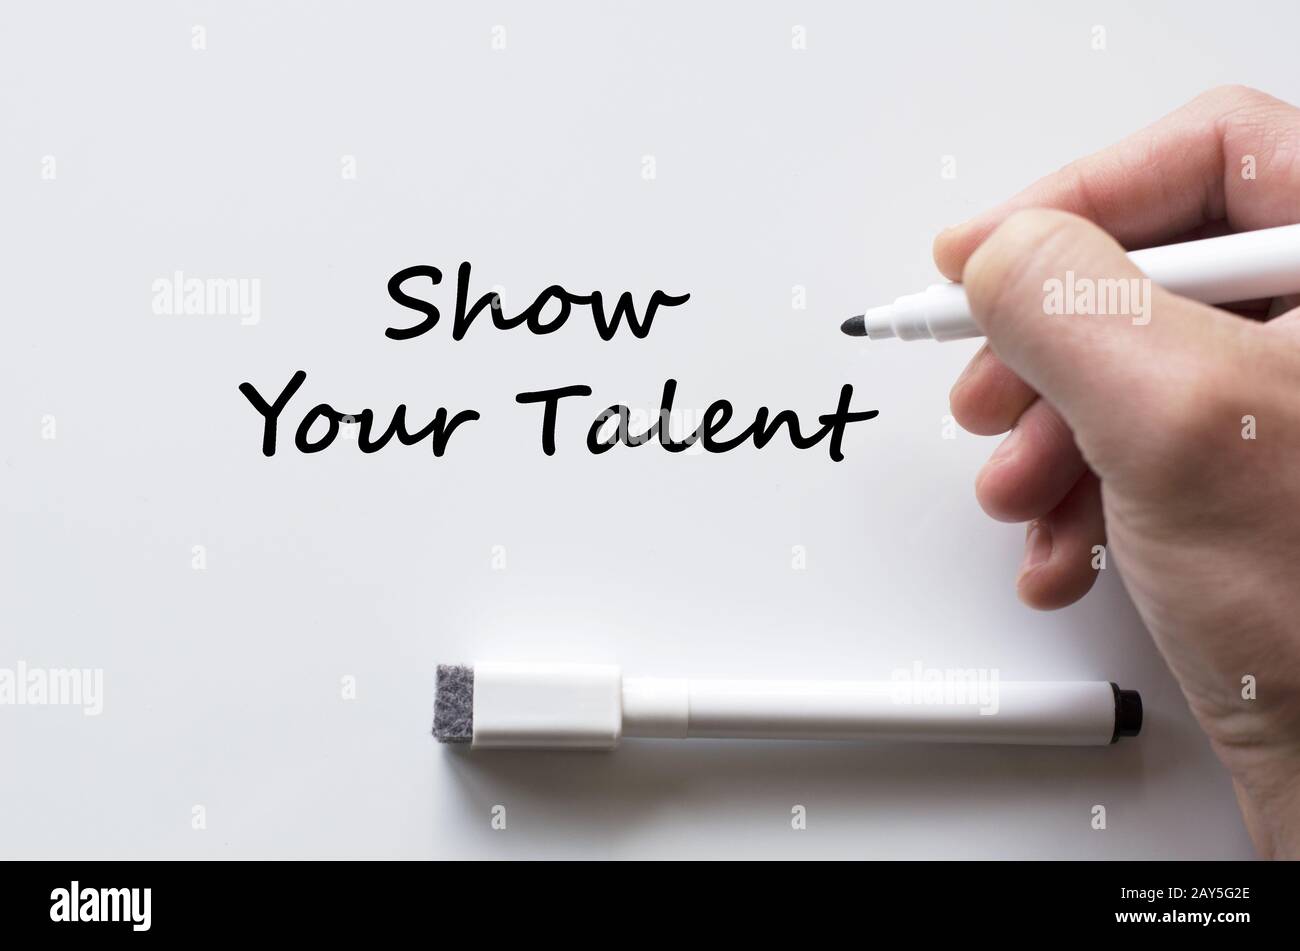 Show your talent written on whiteboard Stock Photo